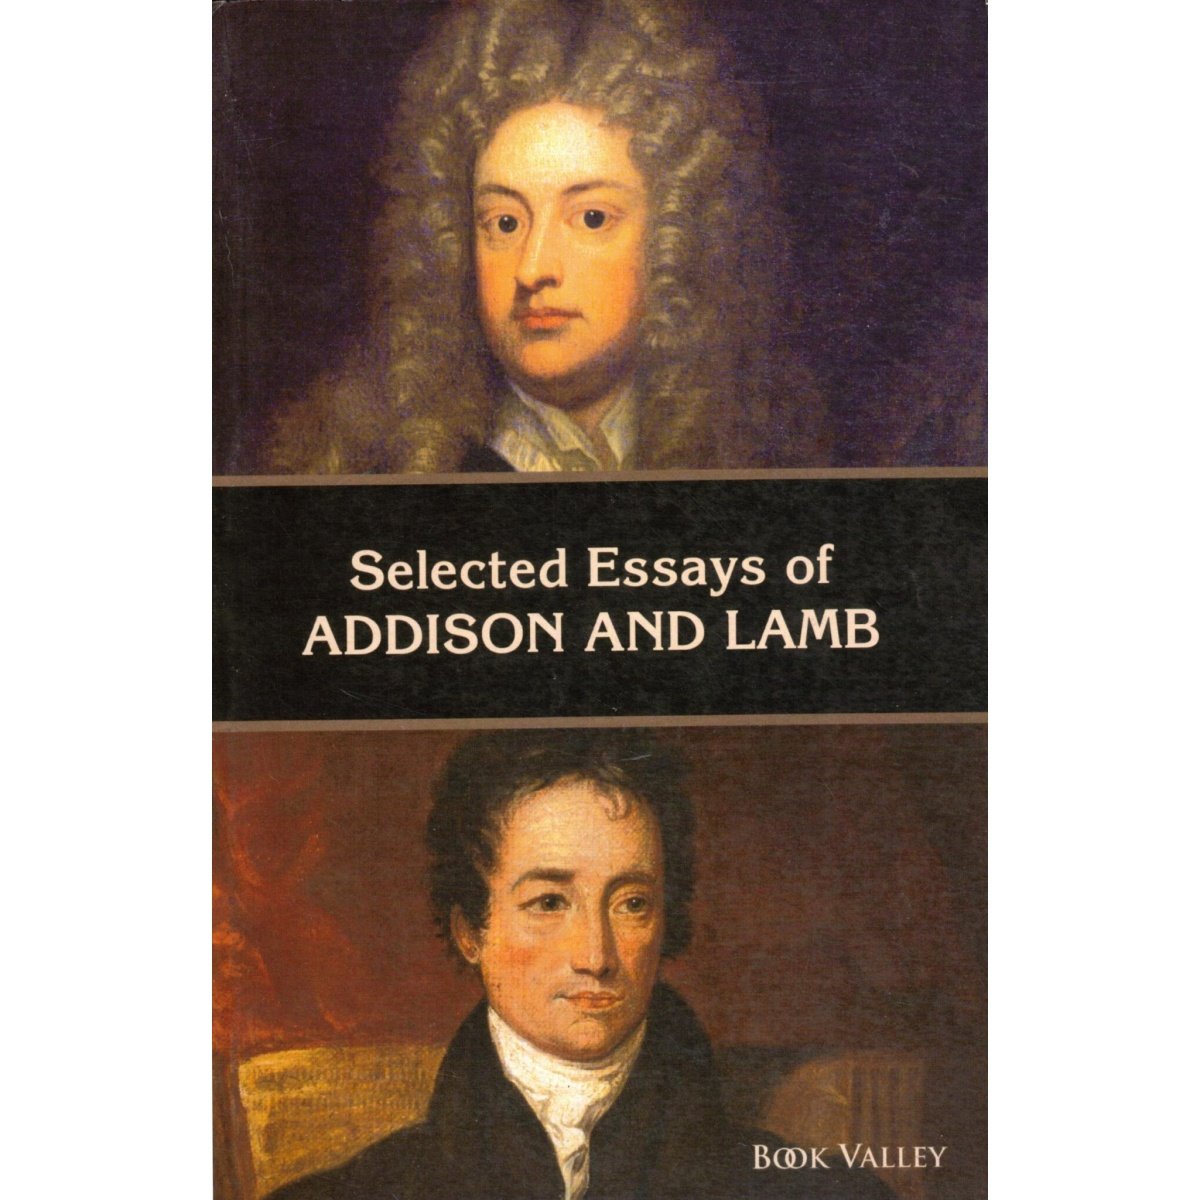 SELECTED ESSAYS OF ADDISON AND LAMB